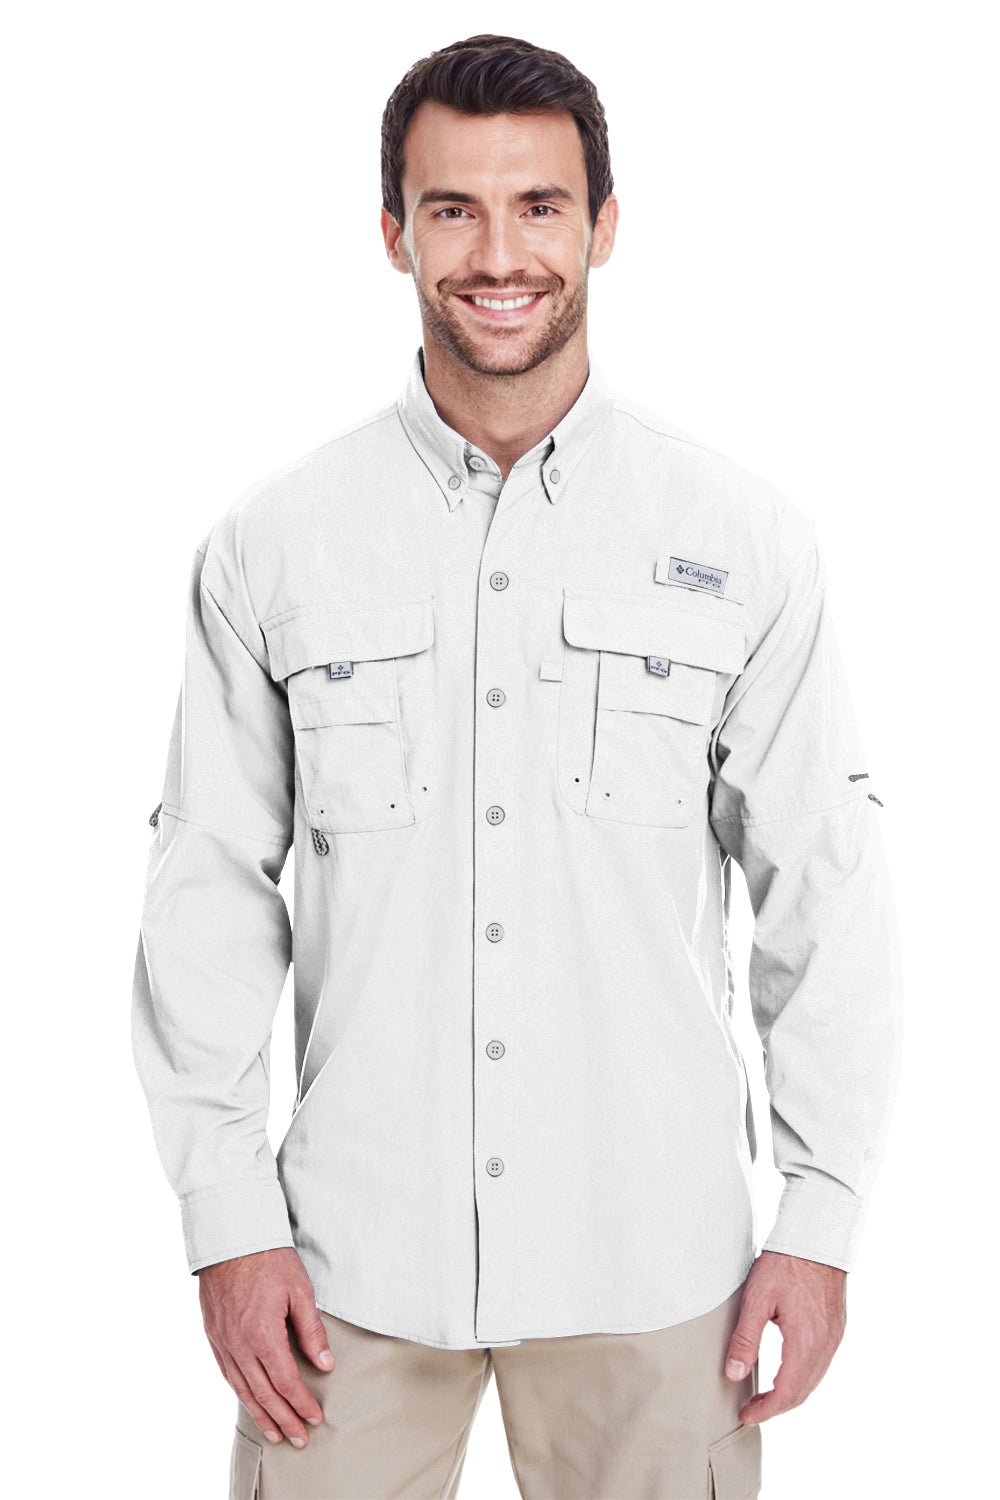 Columbia 7048 Mens Bahama II Moisture Wicking Long Sleeve Button Down Shirt w/ Double Pockets White Front